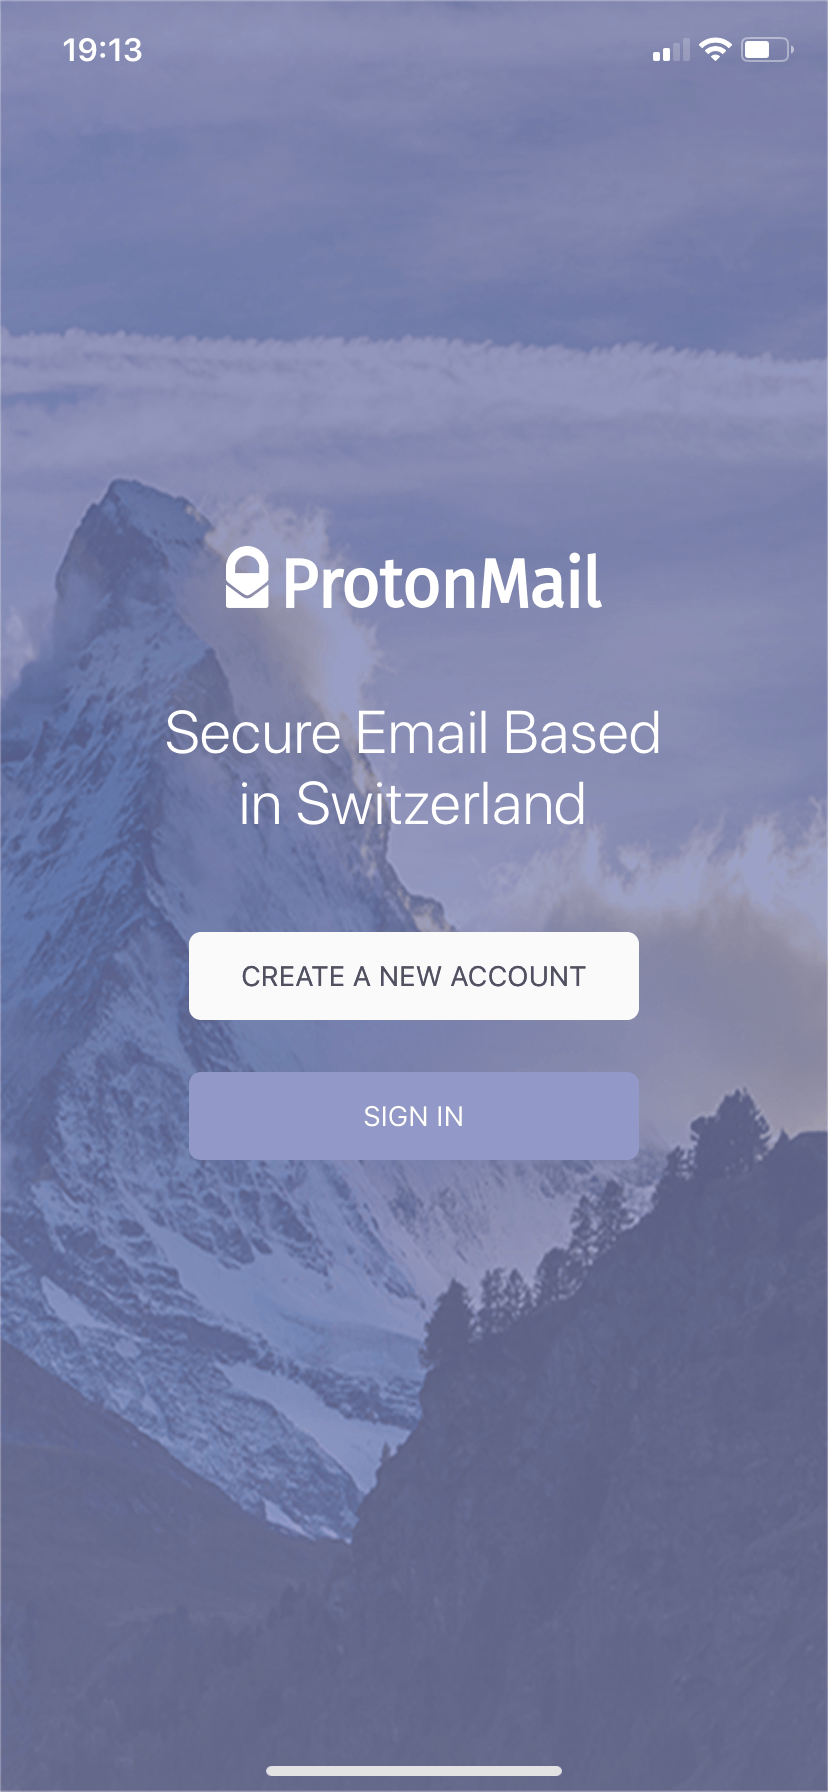 protonmail iphone